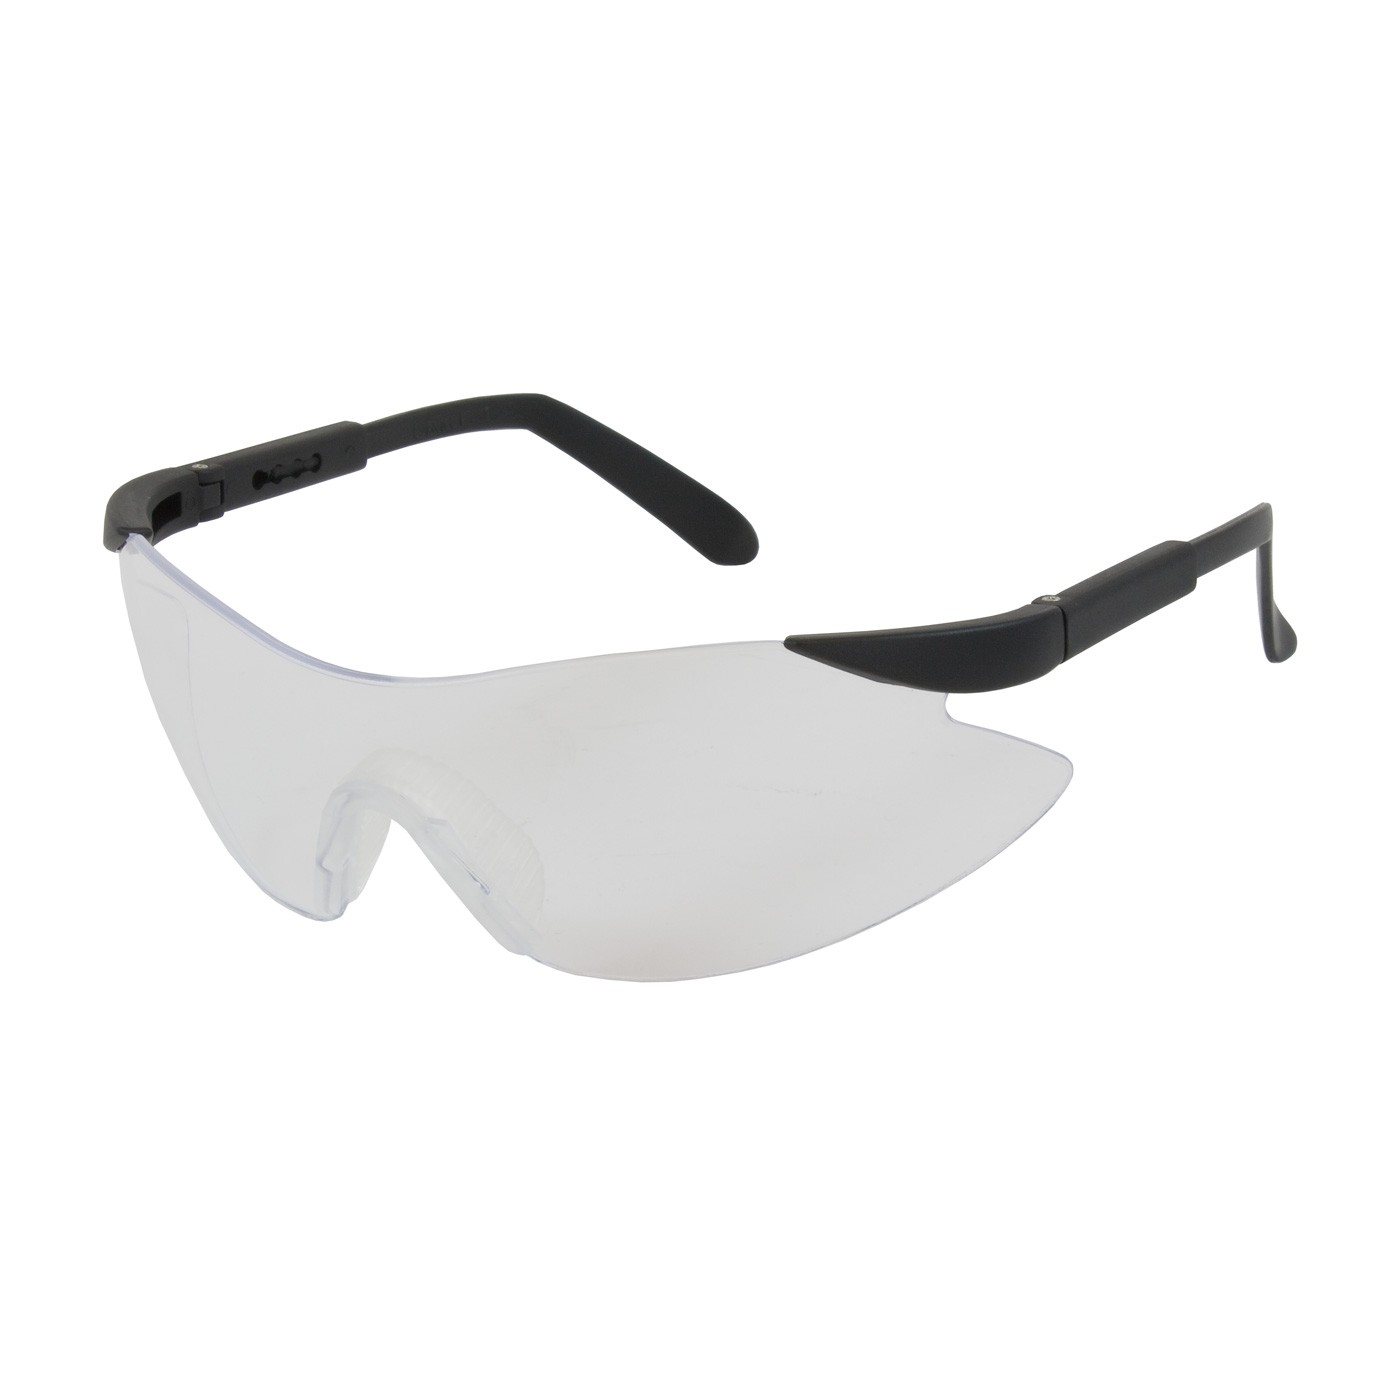 Wilco™ Rimless Safety Glasses with Black Temple, Clear Lens and Anti-Scratch Coating  (#250-92-0000)